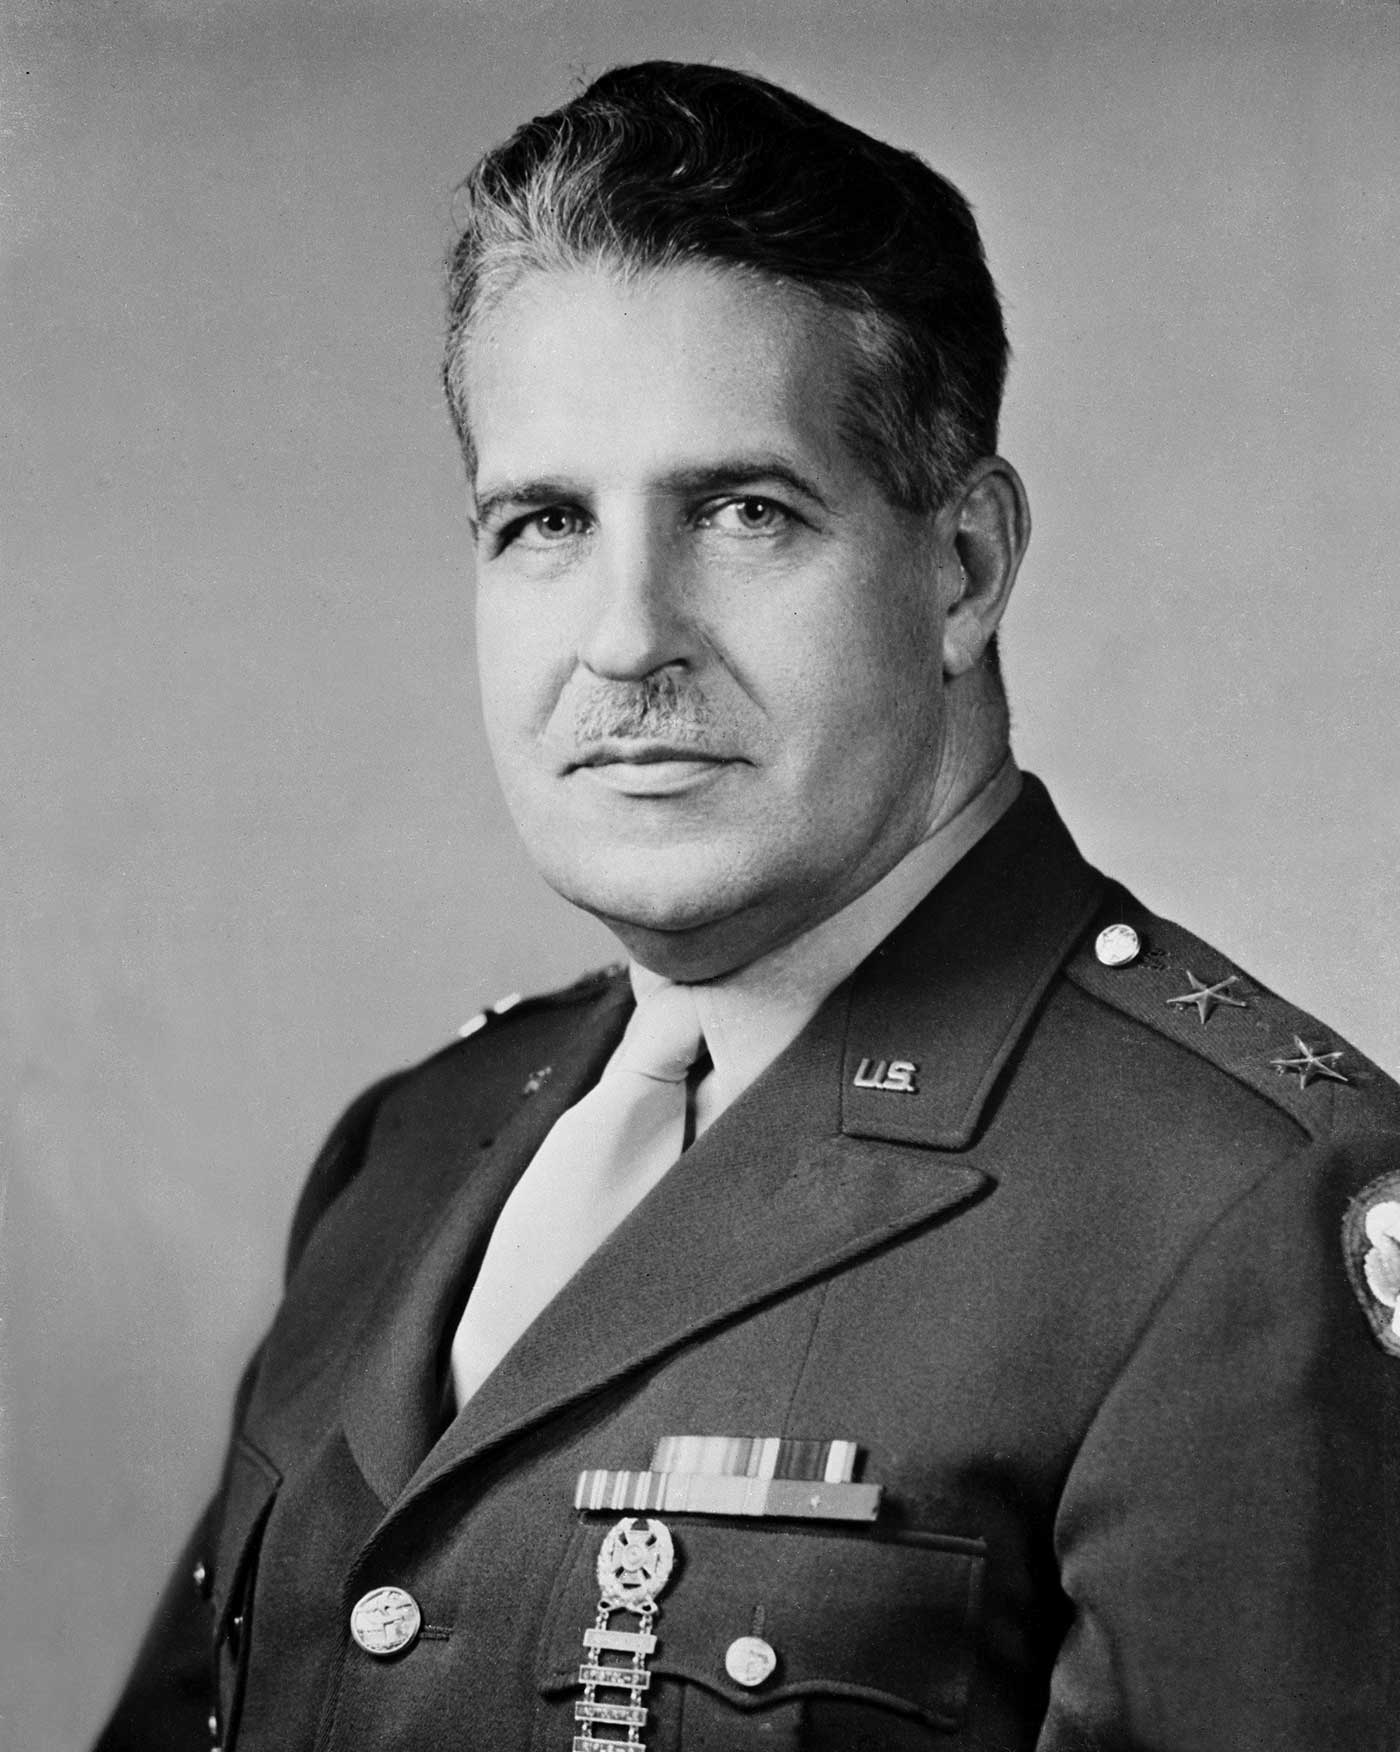 Photograph of General Groves